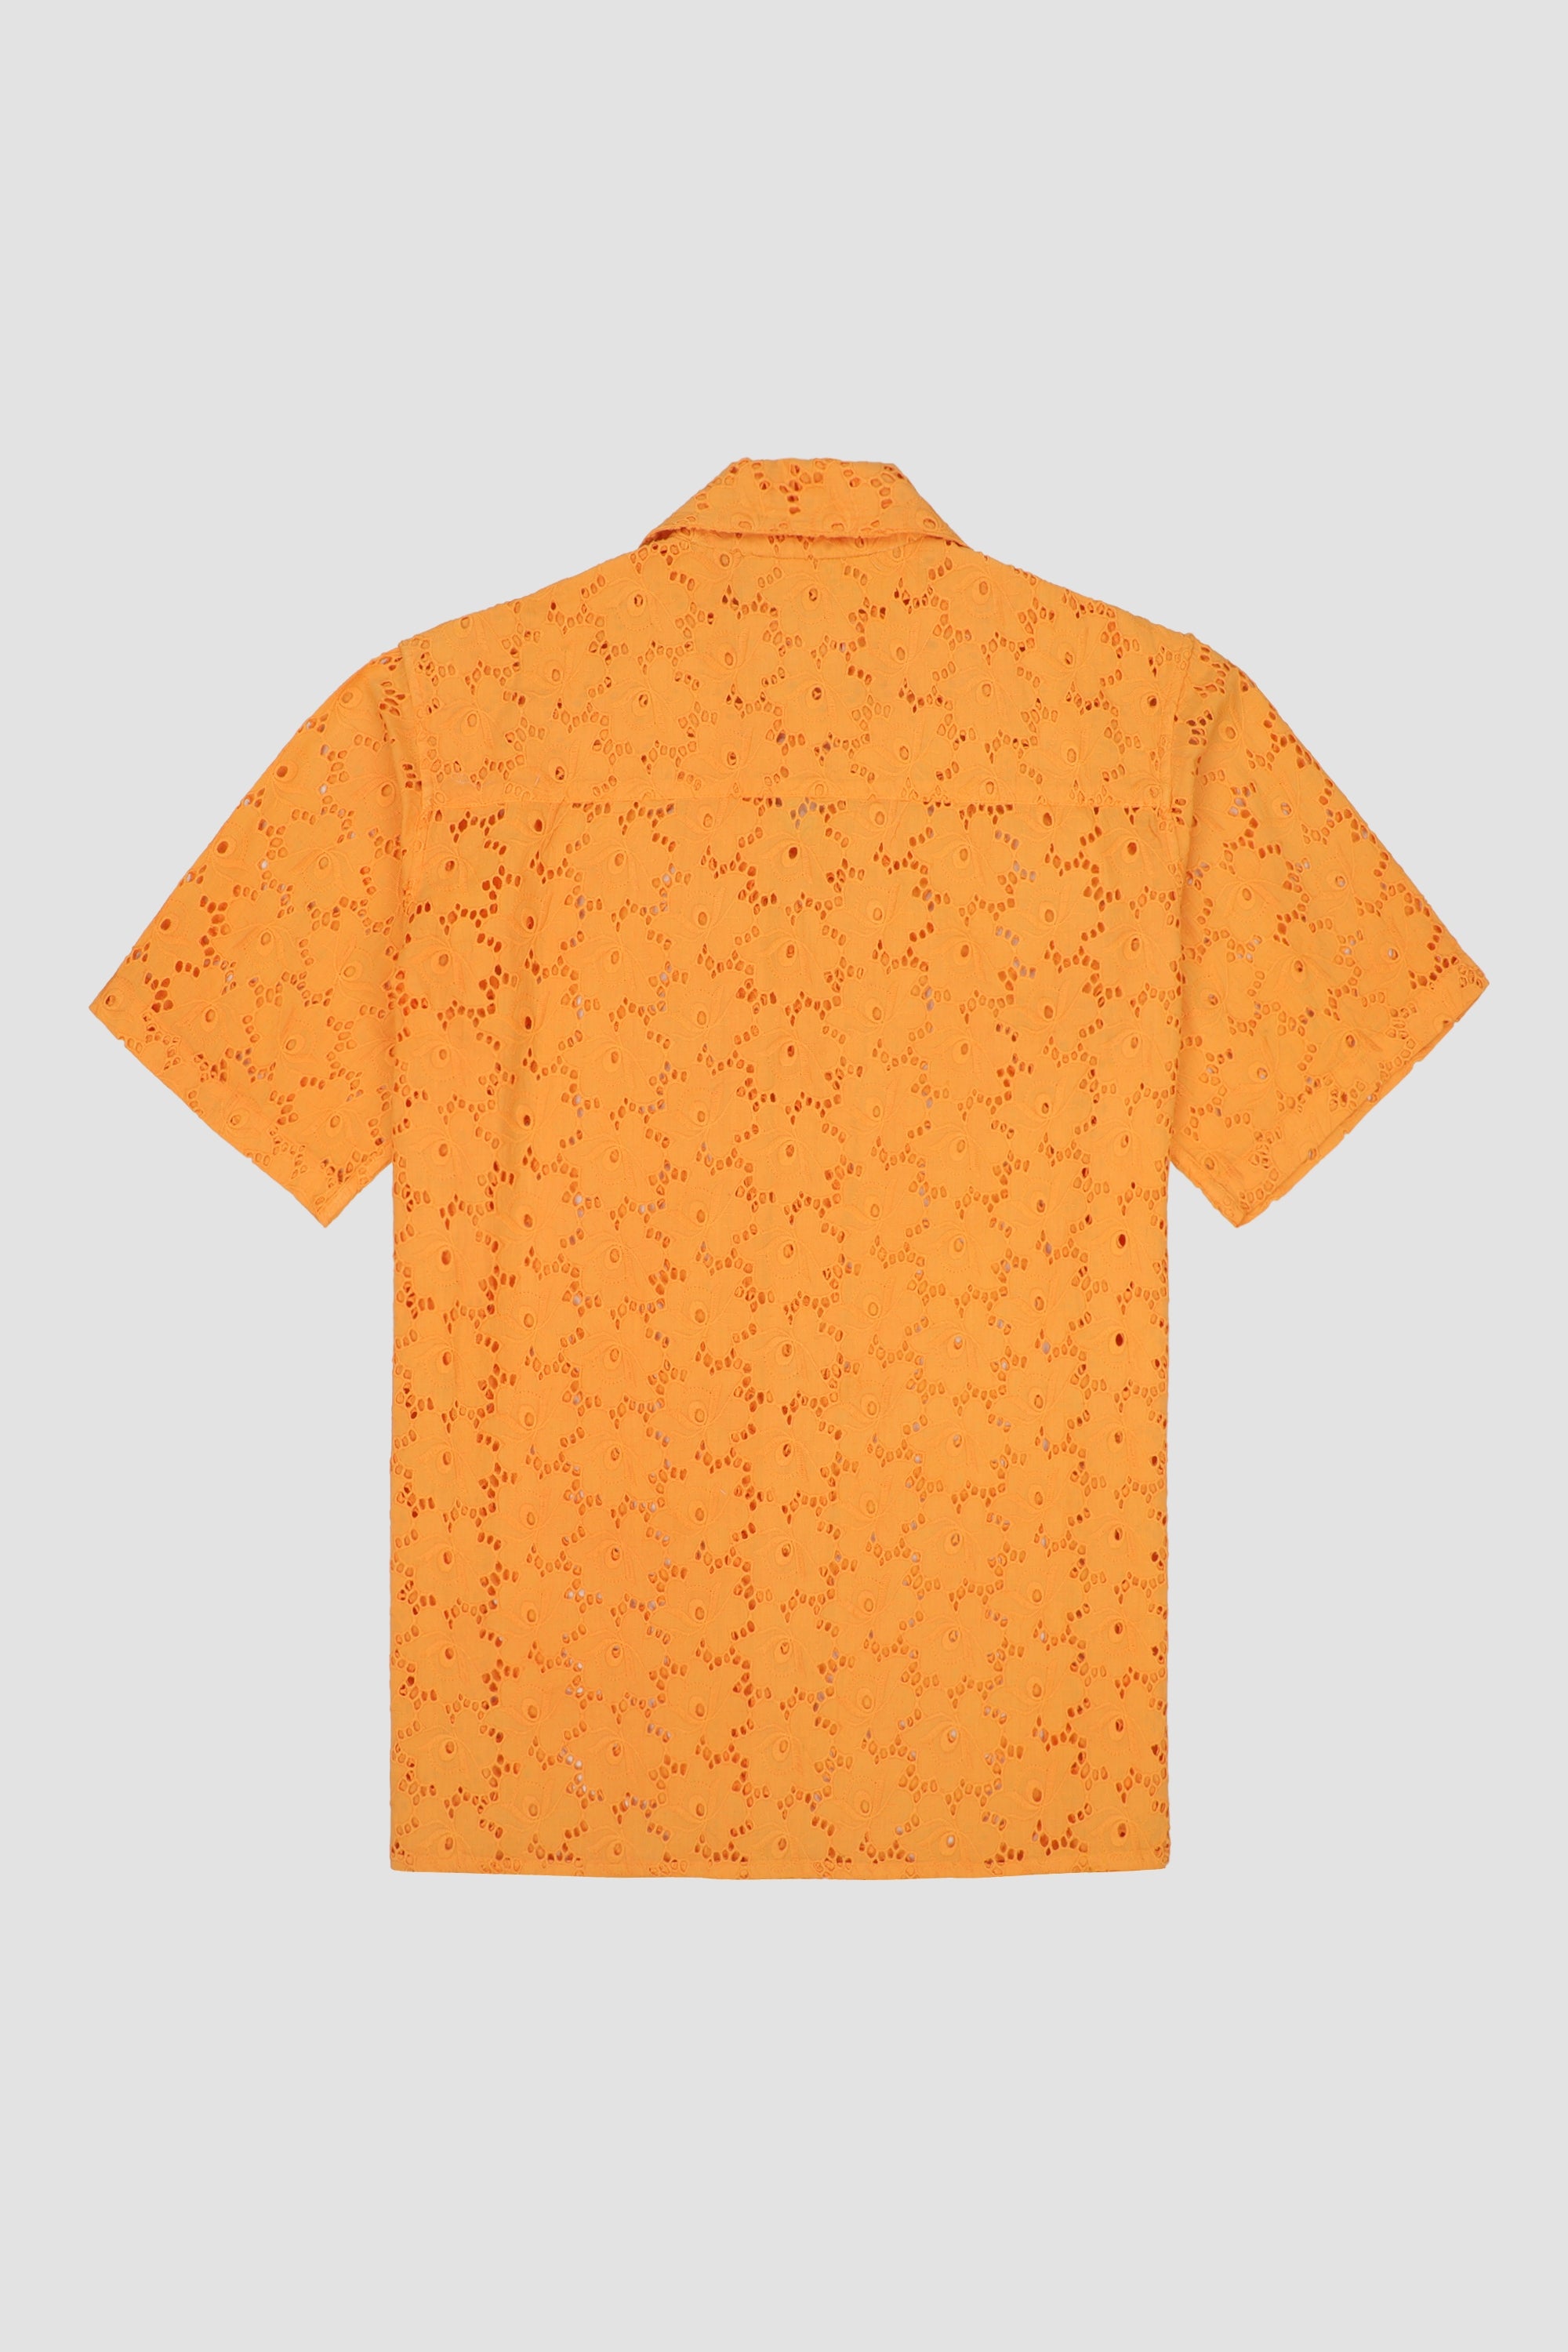 Orange Cuban Collar Cotton Half Sleeves Floral Embroidered Shirt Perfect for Resort & Vacation Wear by Perte D'ego